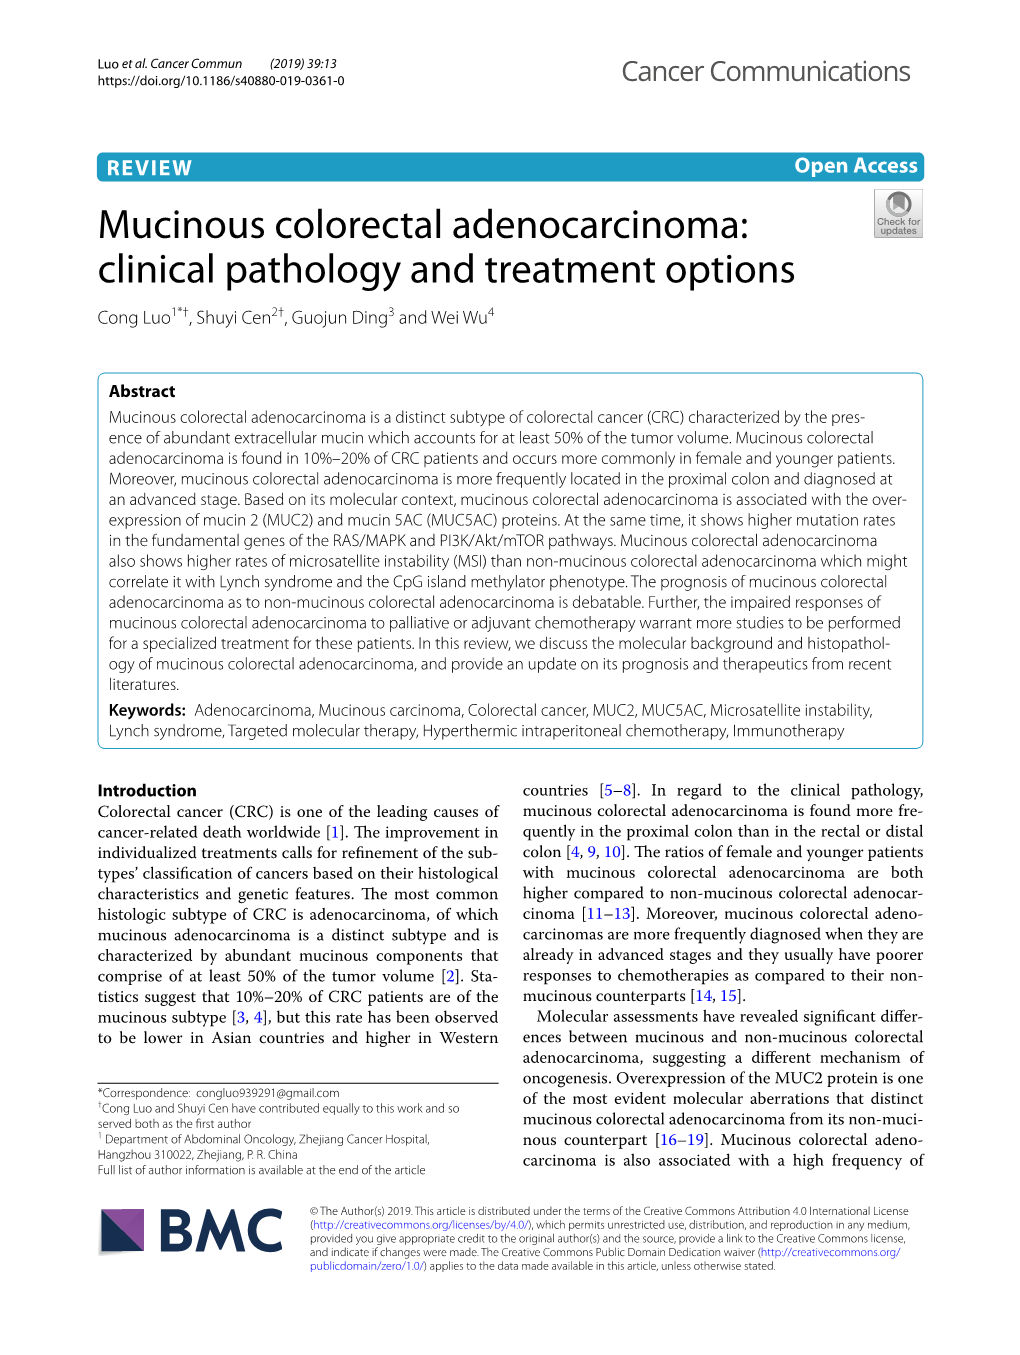 Mucinous Colorectal Adenocarcinoma: Clinical Pathology and Treatment Options Cong Luo1*†, Shuyi Cen2†, Guojun Ding3 and Wei Wu4